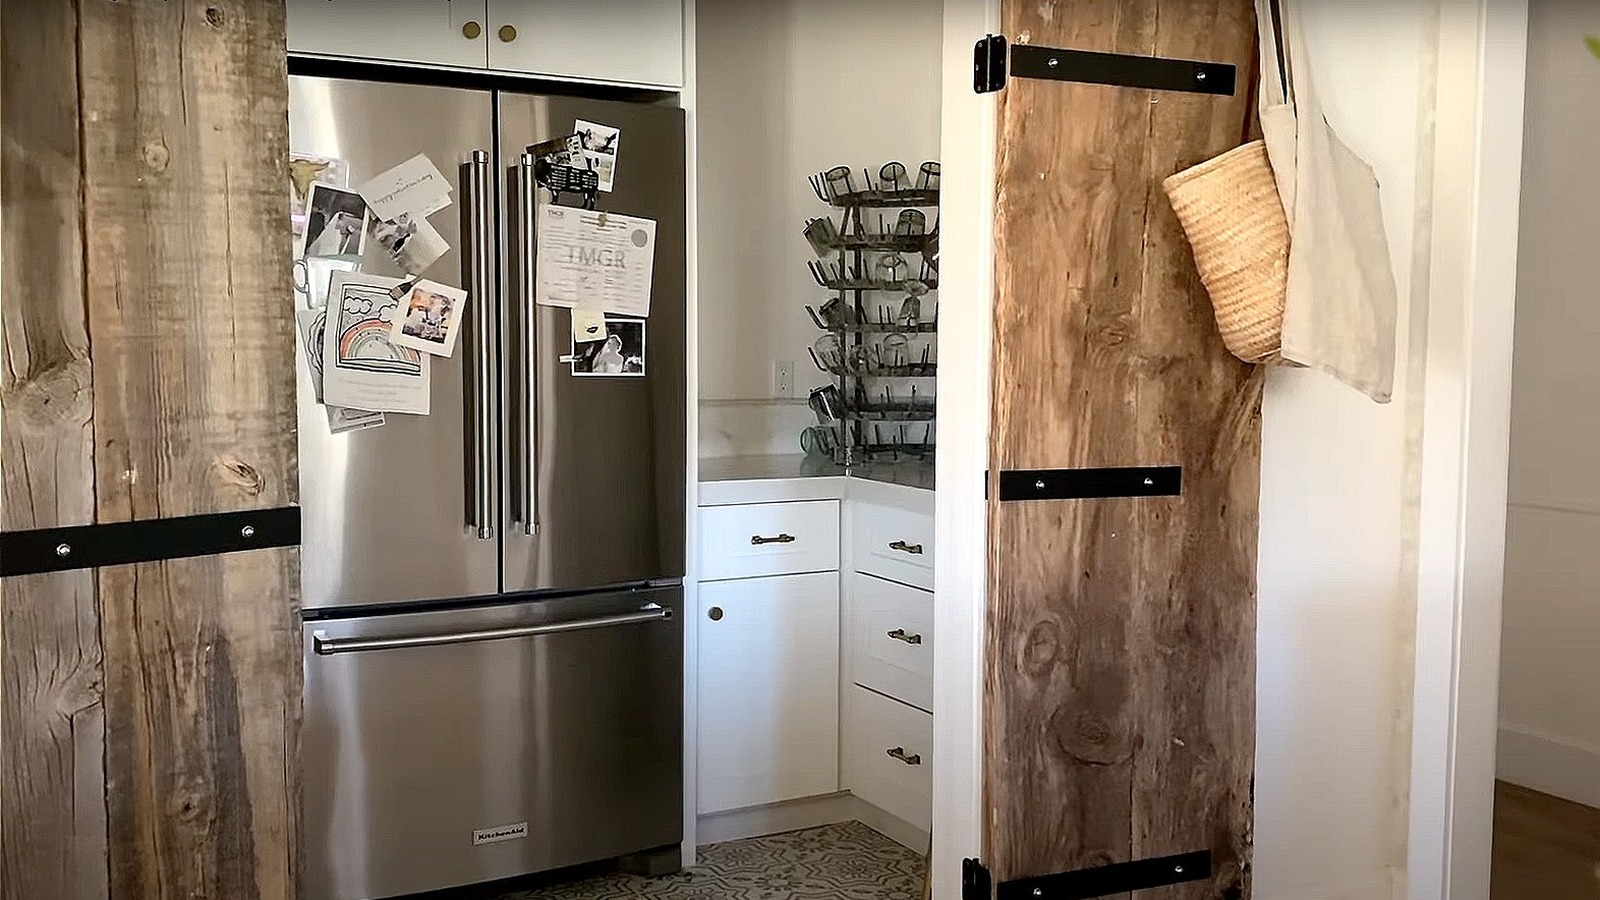 One Viral Tip Explains Why Your Refrigerator Should Be Stored In Your Pantry